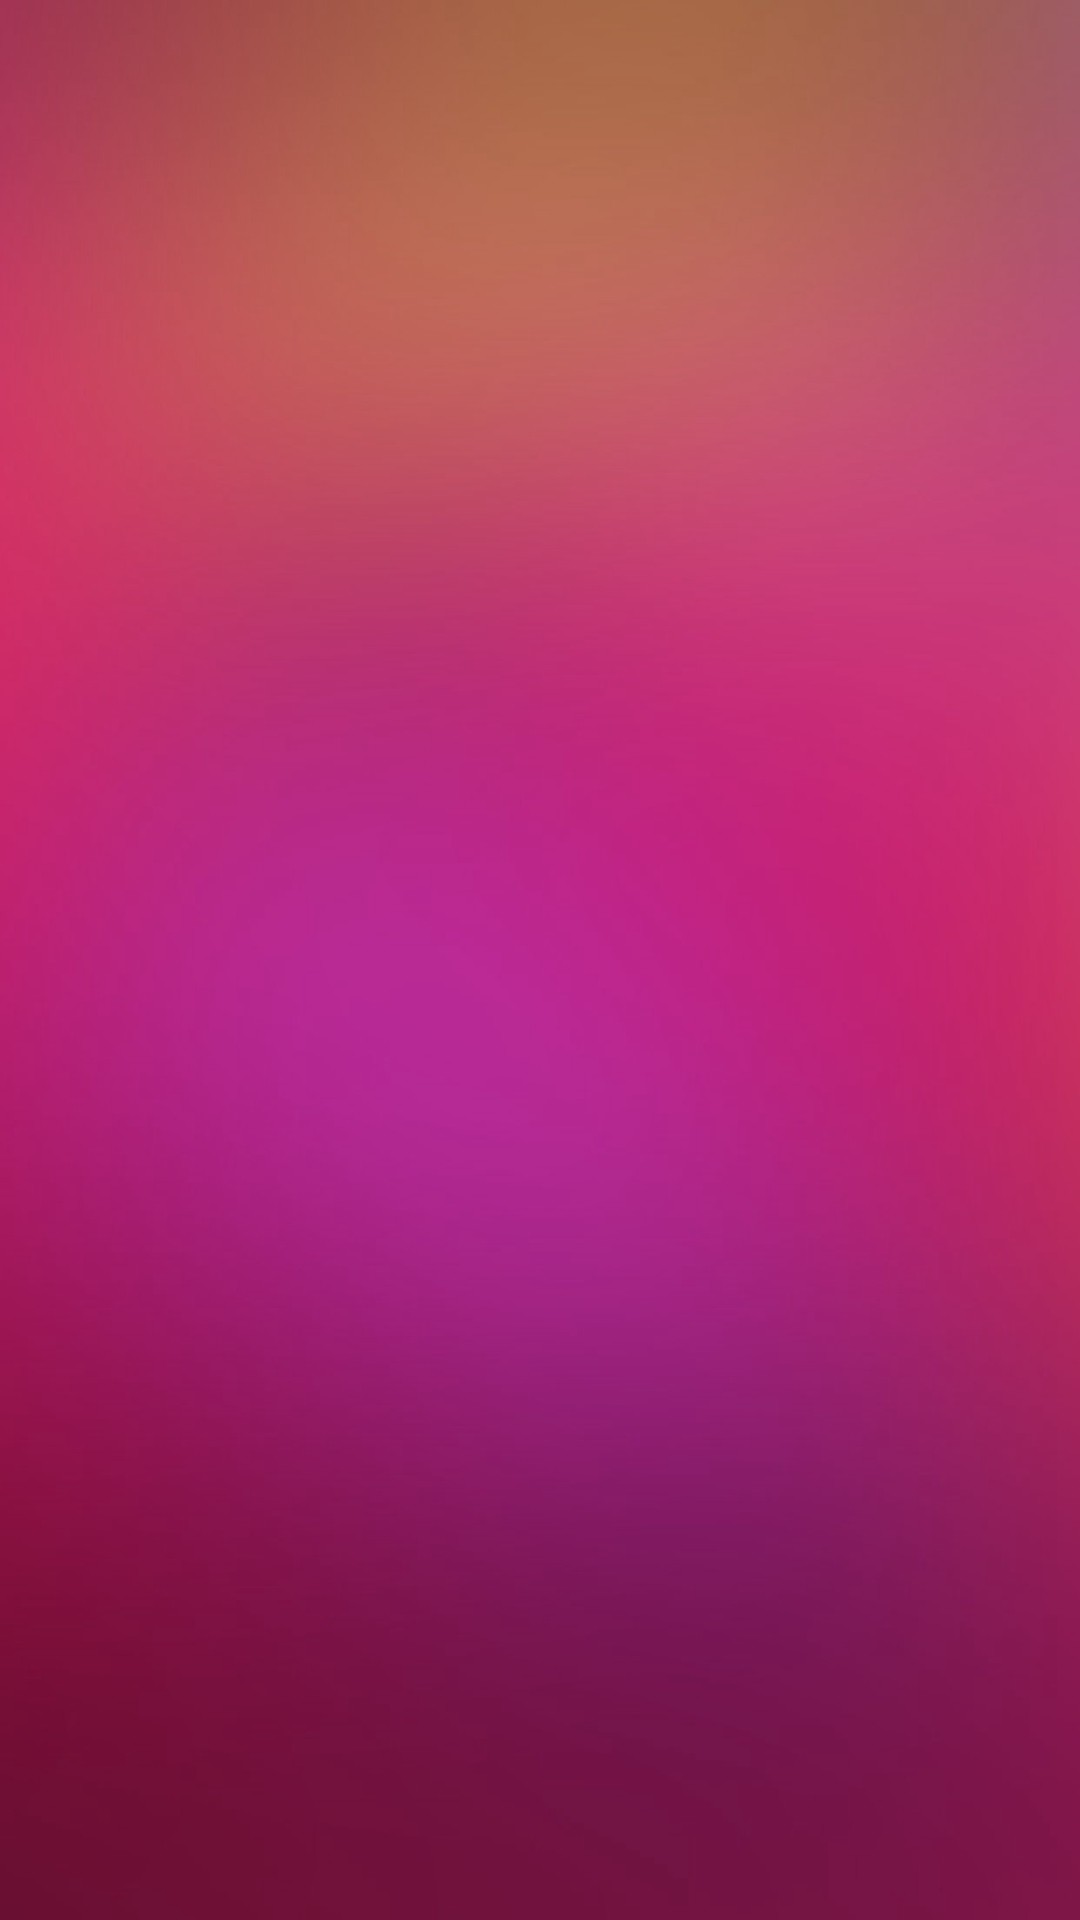 Explore Pink Wallpaper For Iphone and more!